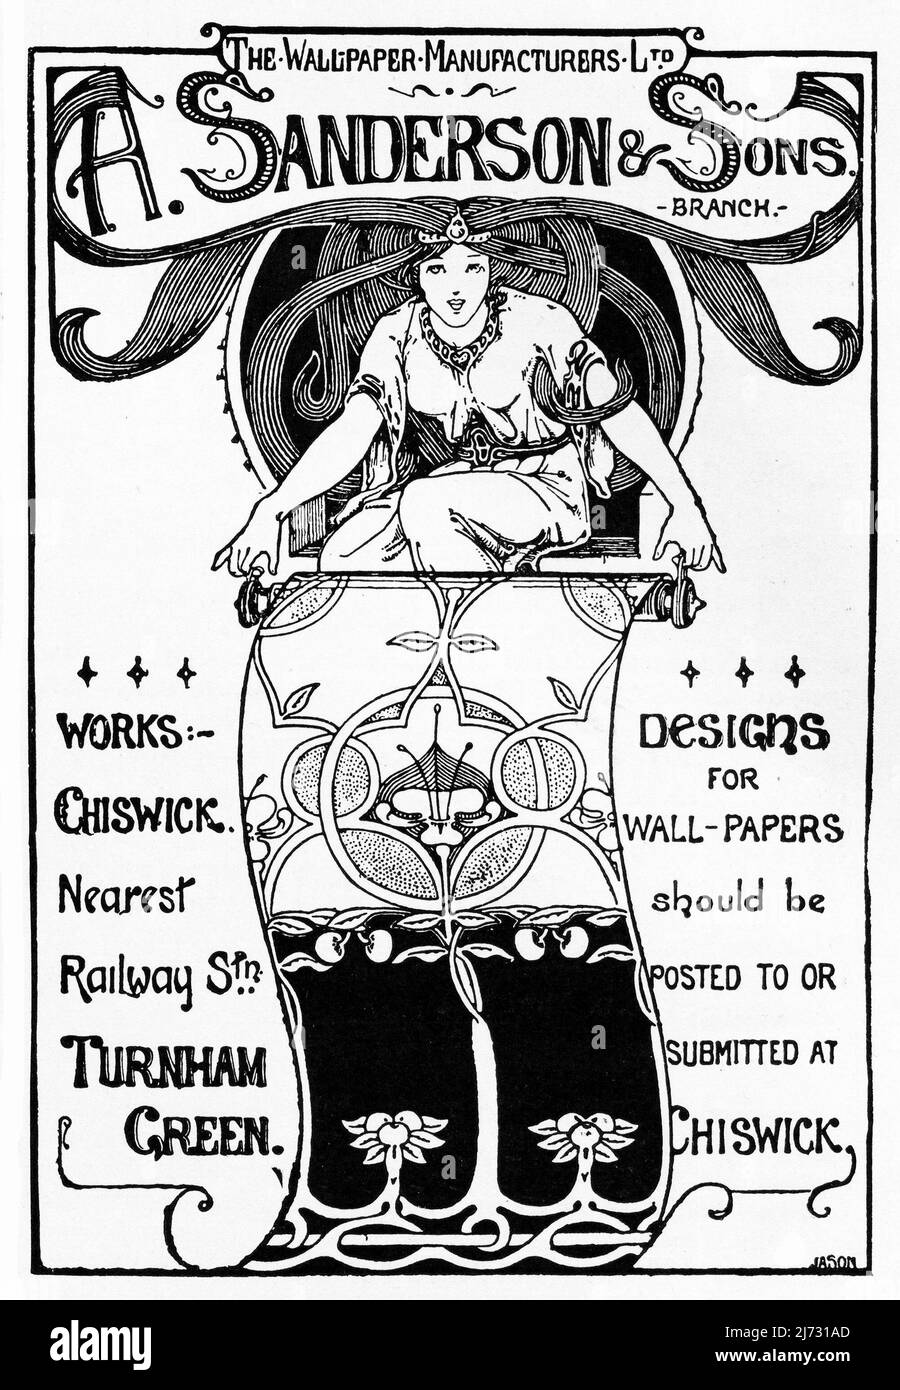 A 1903 ‘Arts Nouveau’ style advertisement promoting “A. Sanderson & Sons, Wallpaper Manufacturers of Chiswick, London. Stock Photo